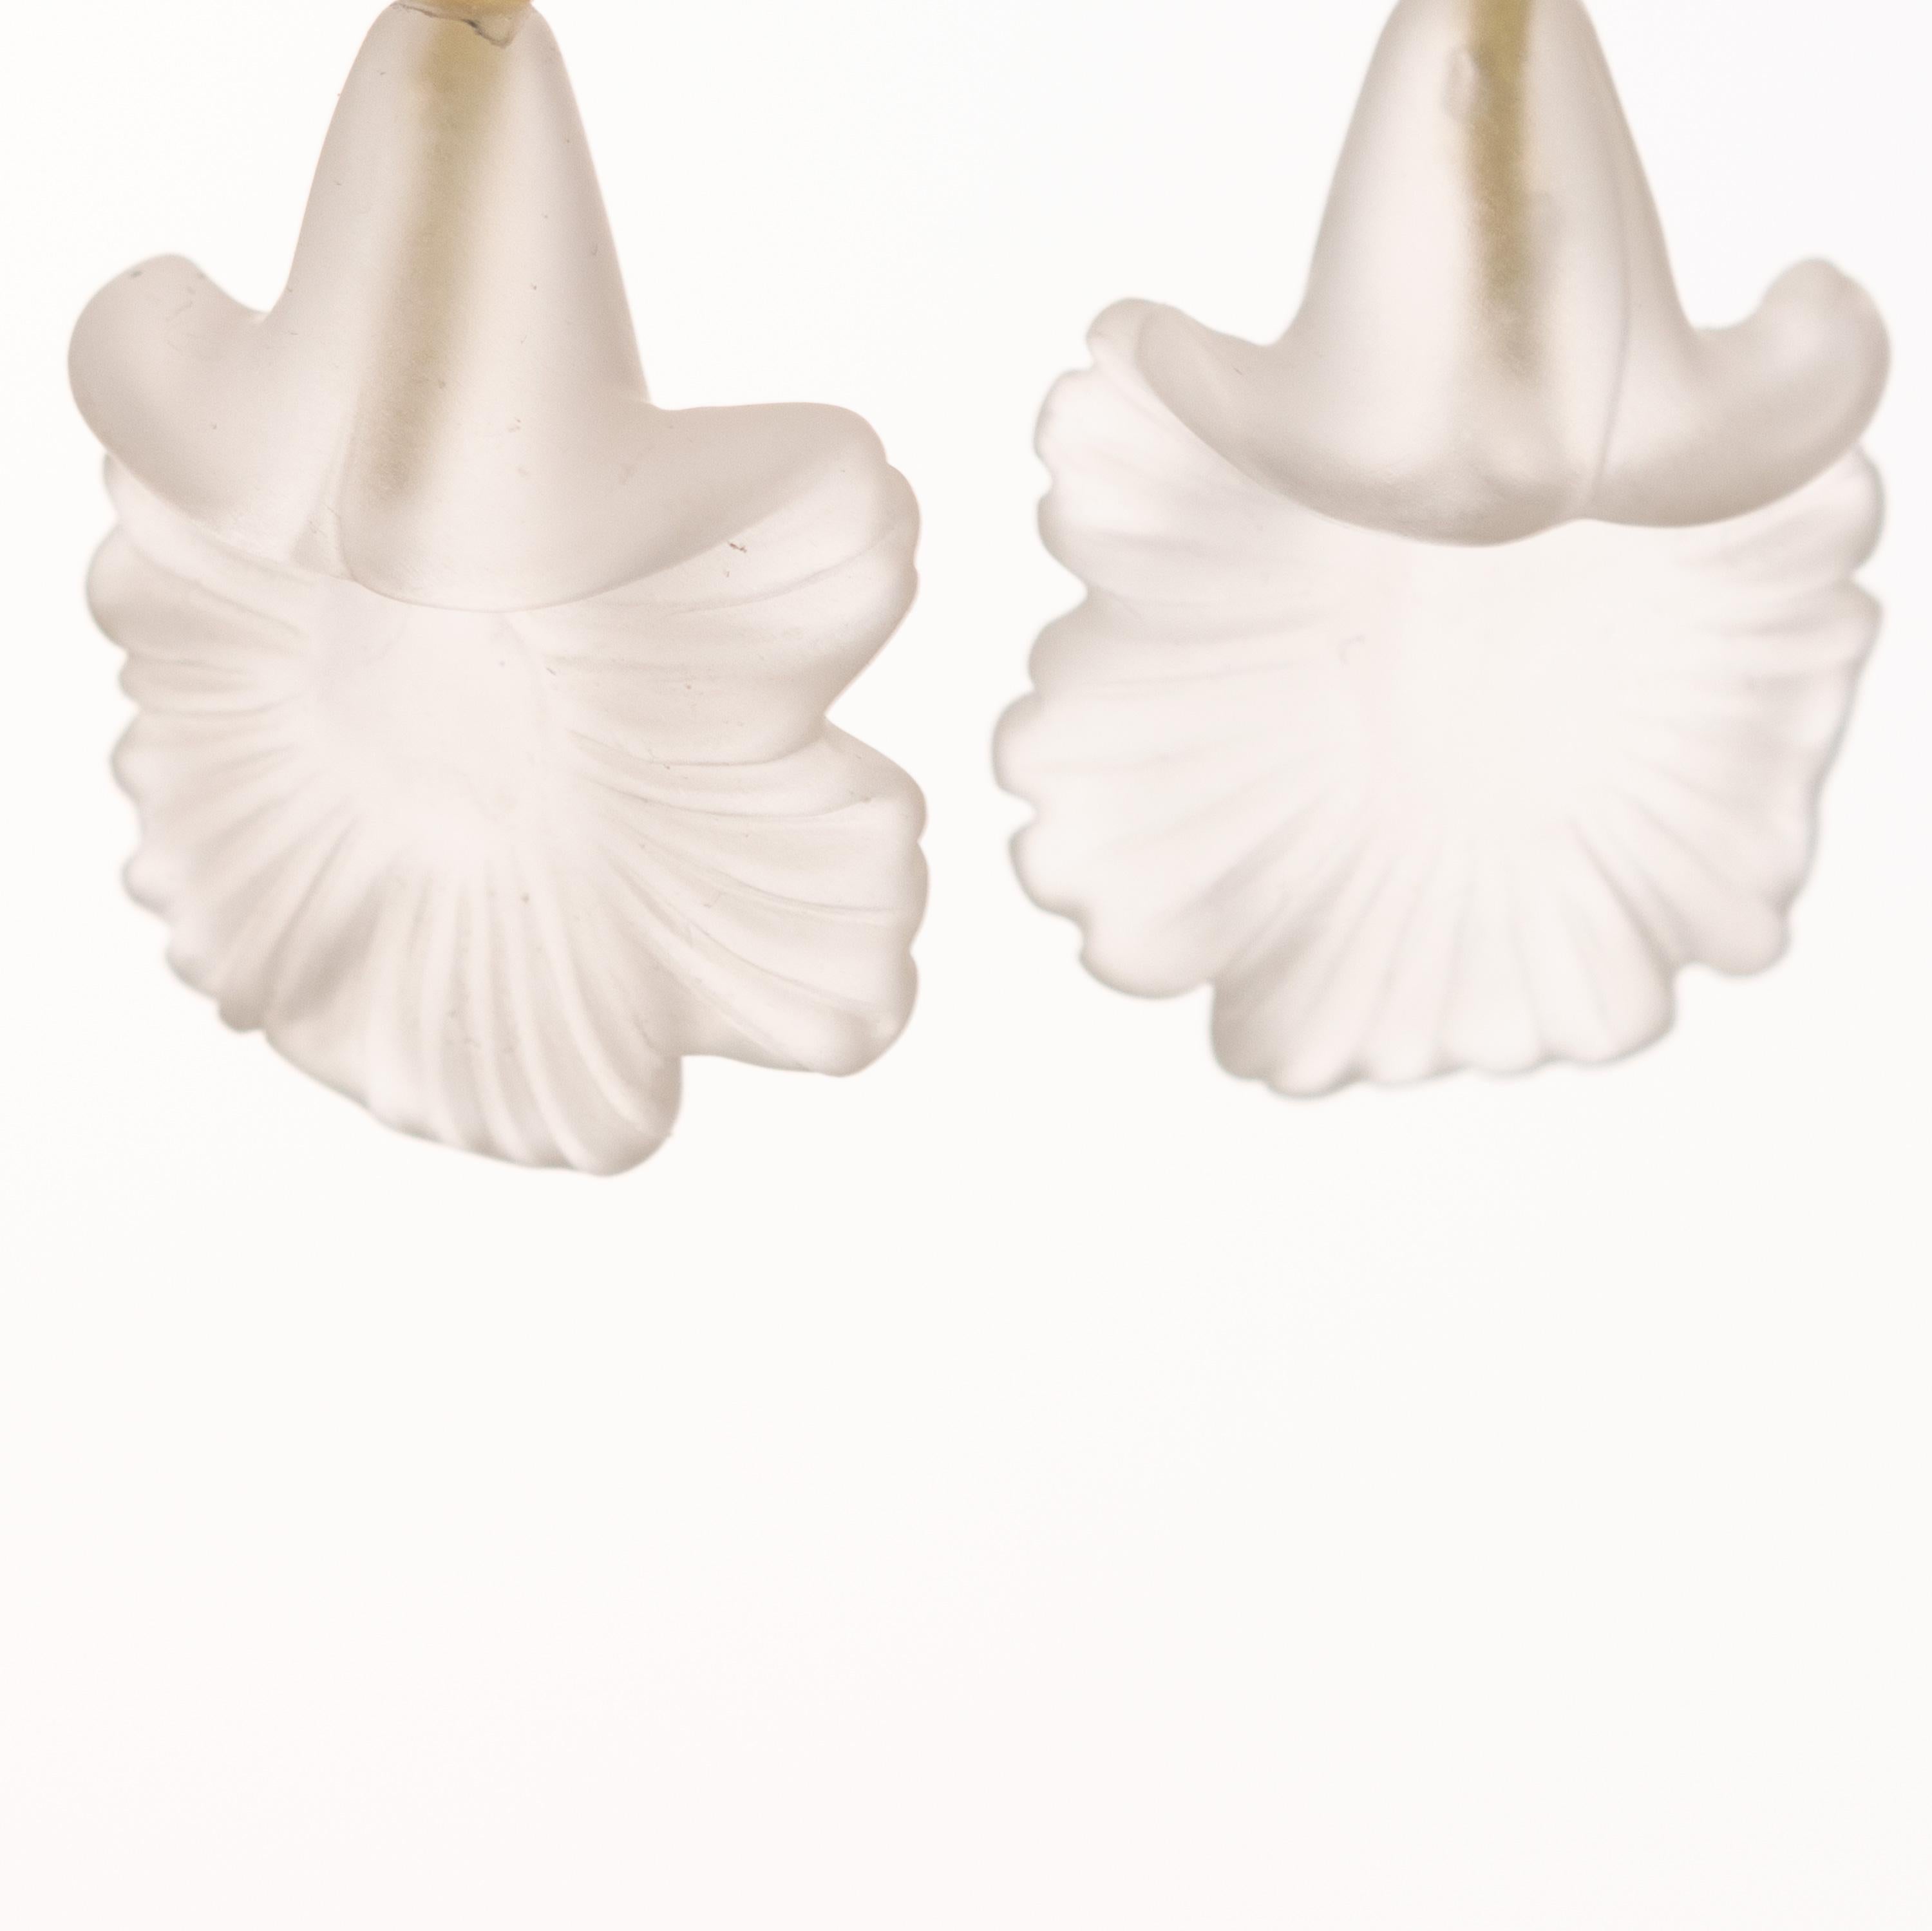 Stunning unique pieces. Rock crystal flower shaped earrings. Marvelous jewel with 18 karat yellow gold setting.

Rock crystal brings the gentle healing power of the sea. It is a stress relieving stone; relaxing, soothing and calming to the emotions.